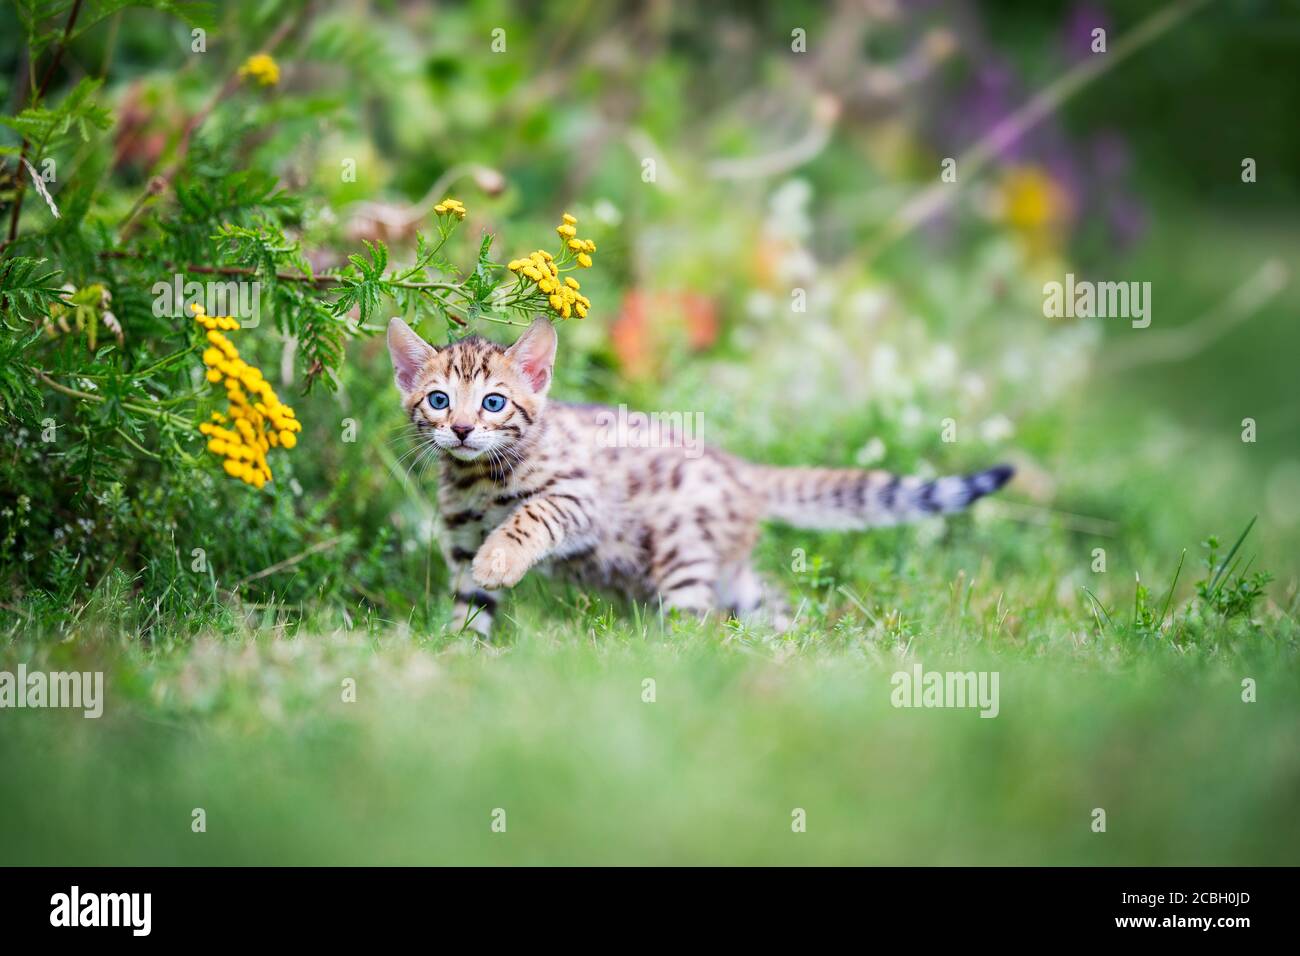 A cute spotted purebred Bengal kitten outdoors in the grass with flowers in the background. Summertime adventure. The kitten is 7 weeks old. Copy spac Stock Photo